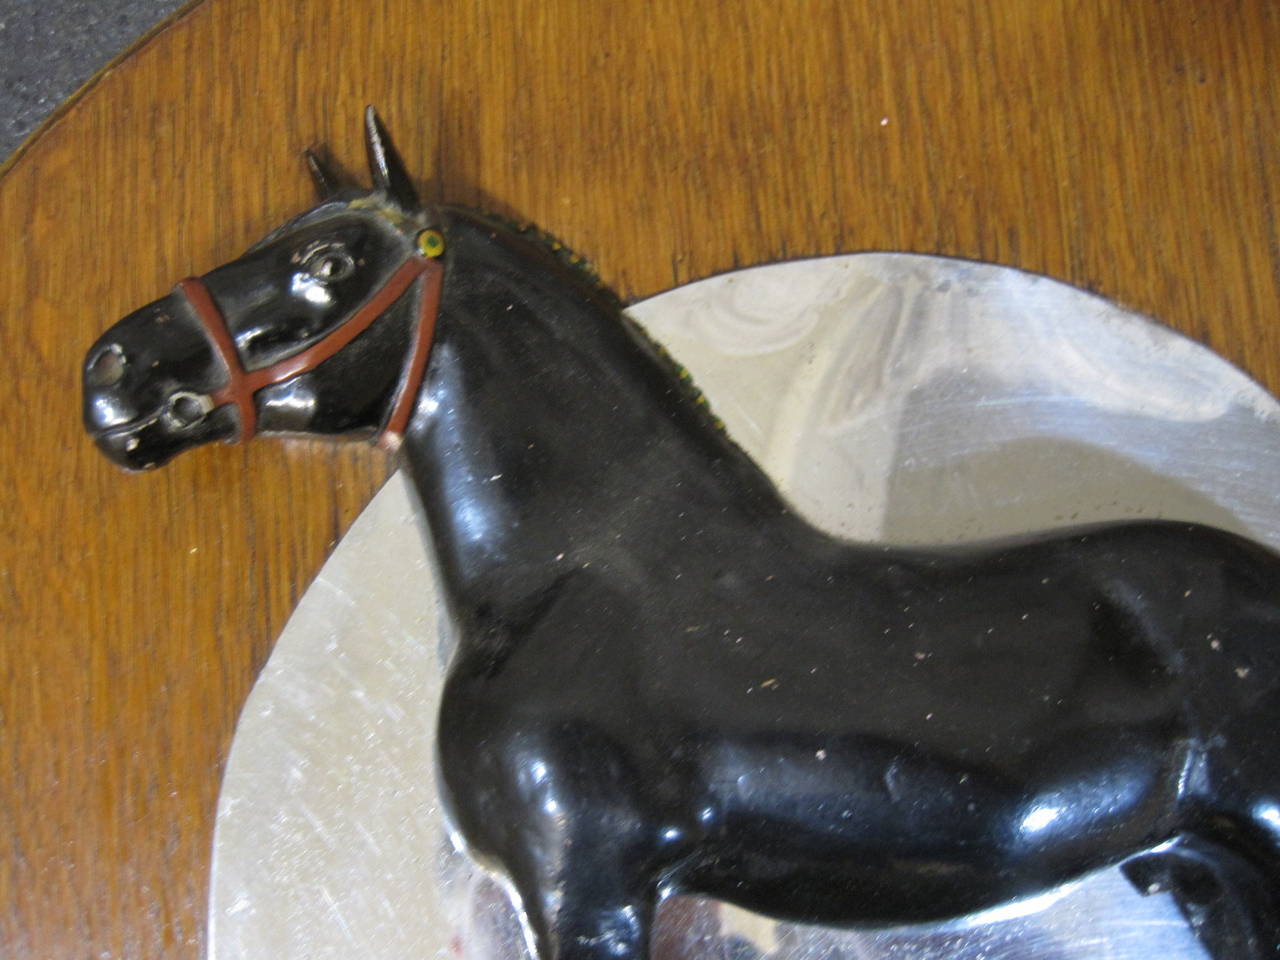  Ross Butler Horse Sculpture for Dawes Black Horse Ale Advertising Sign

Plaster horse sculpture advertising sign by Ross Butller for Dawes Black Horse Ale. Unsigned.

Free shipping within the United States and Canada.

As visual merchandising